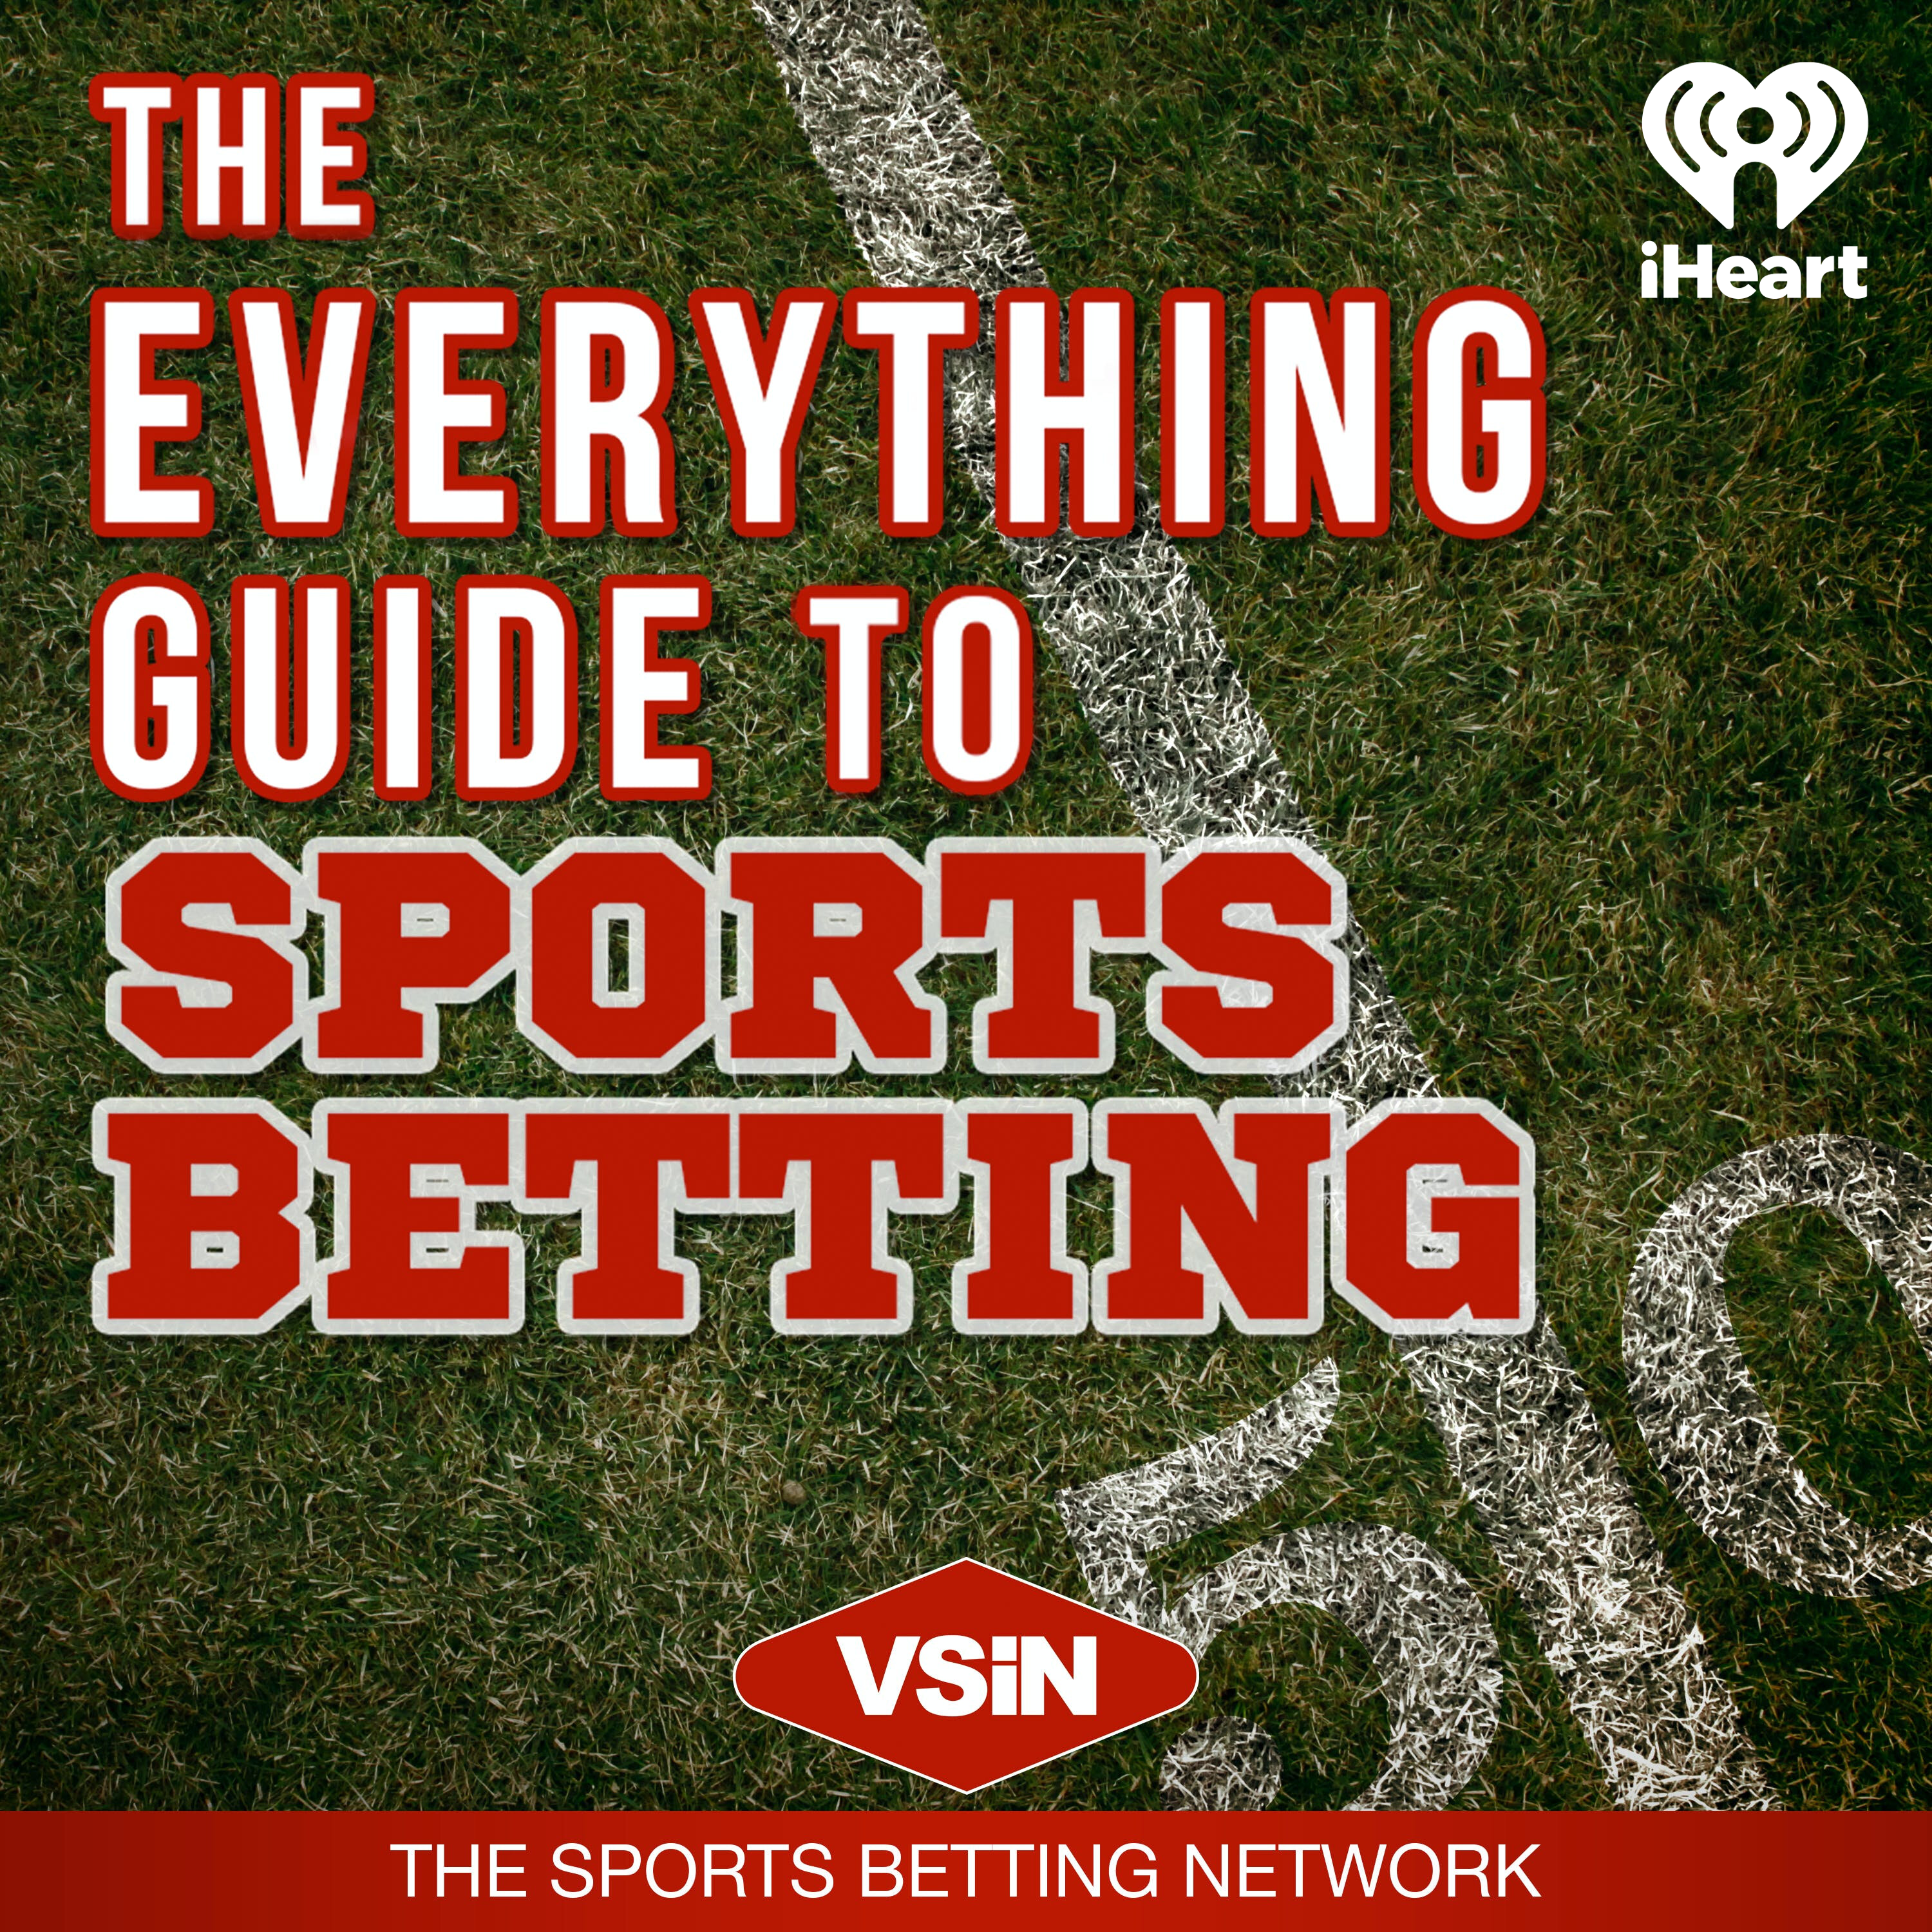 Everything Guide to Sports Betting | February 3, 2021